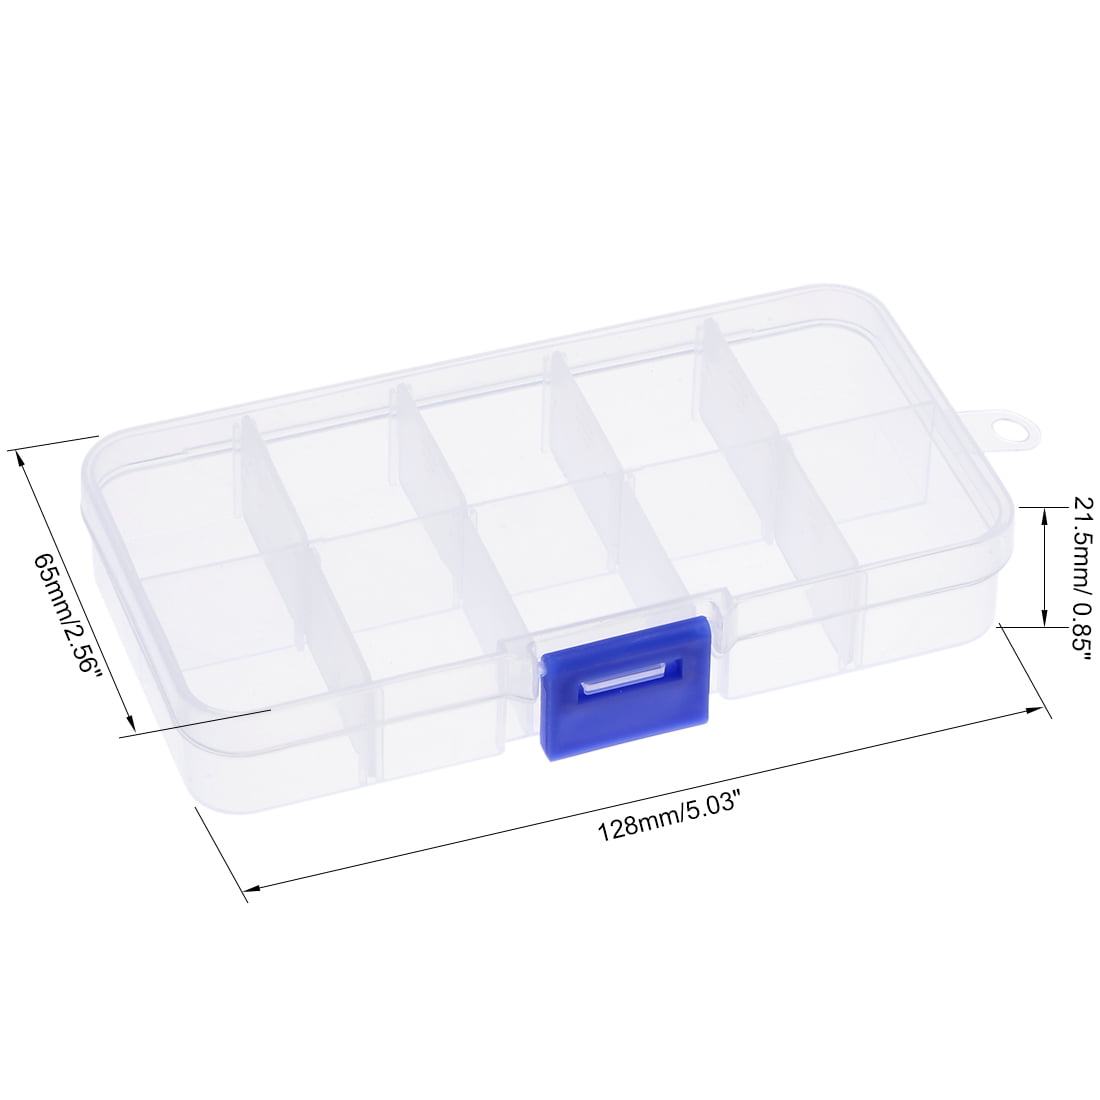 SOMELINE Transparent Organisers Plastic Storage box Container Adjustable Divider for Accessories Case Holder Display Tray with Detachable Compartments Diamonds 3 Pack 